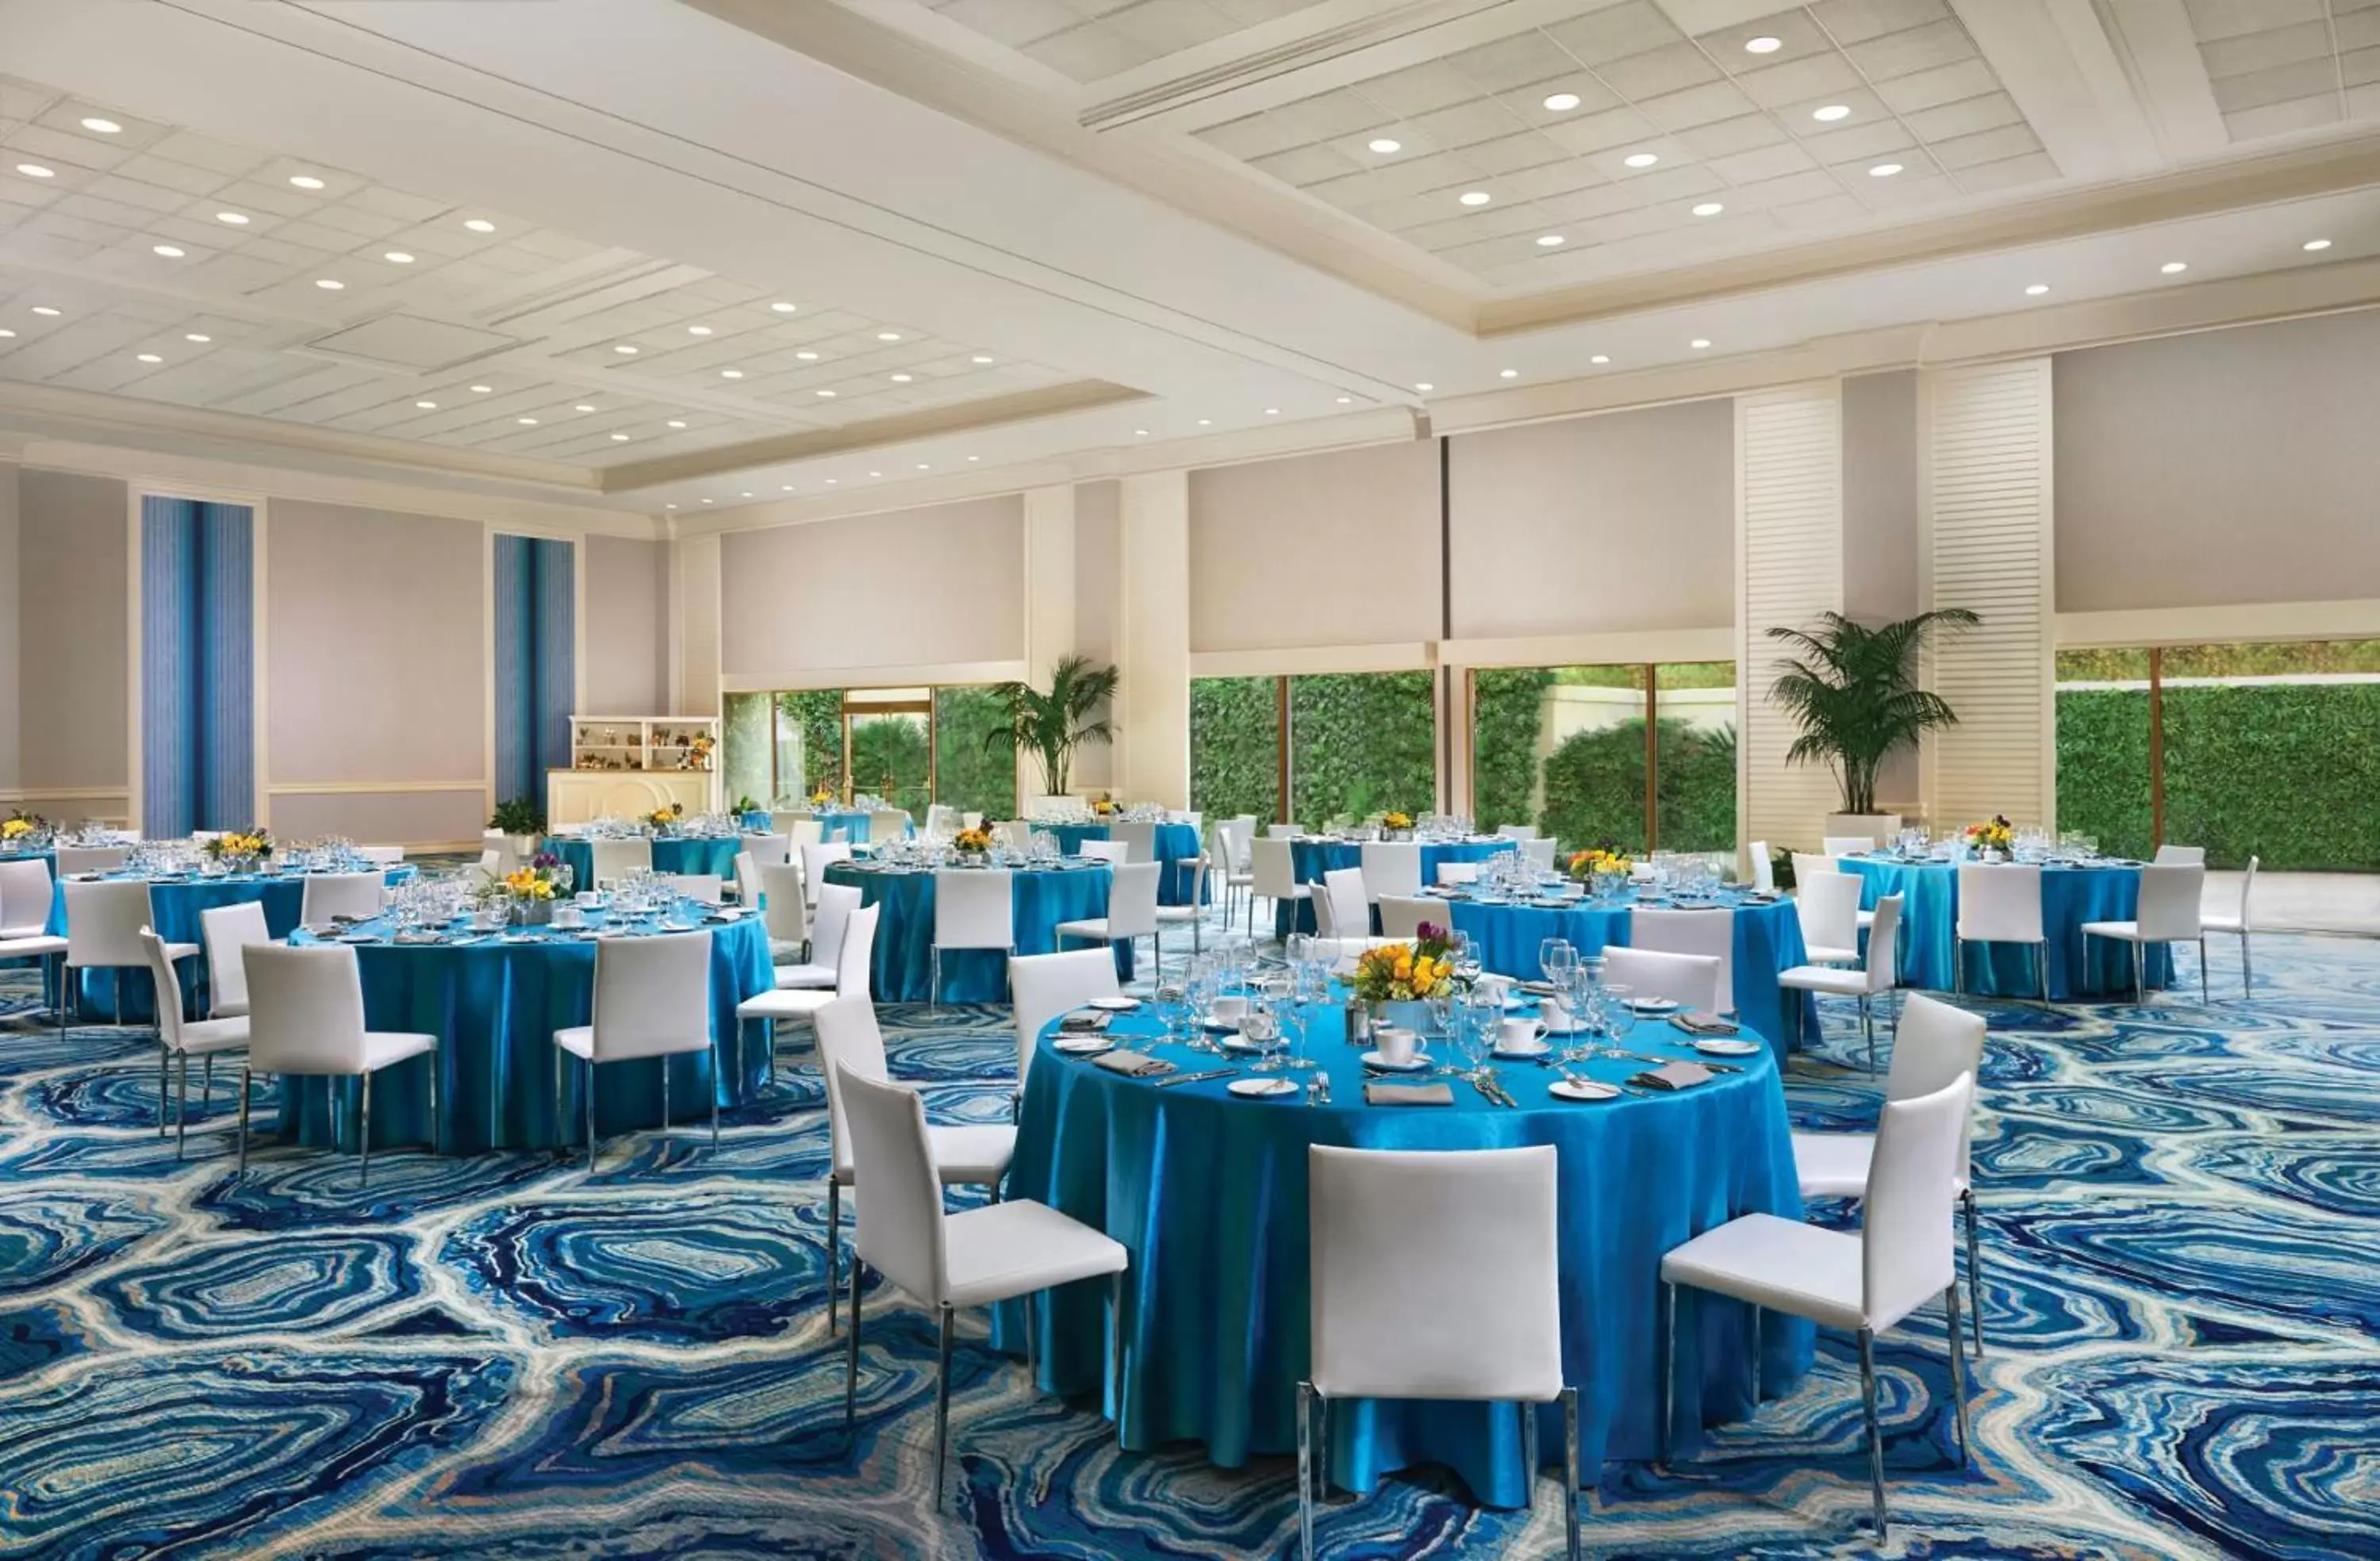 Banquet/Function facilities in The Mirage